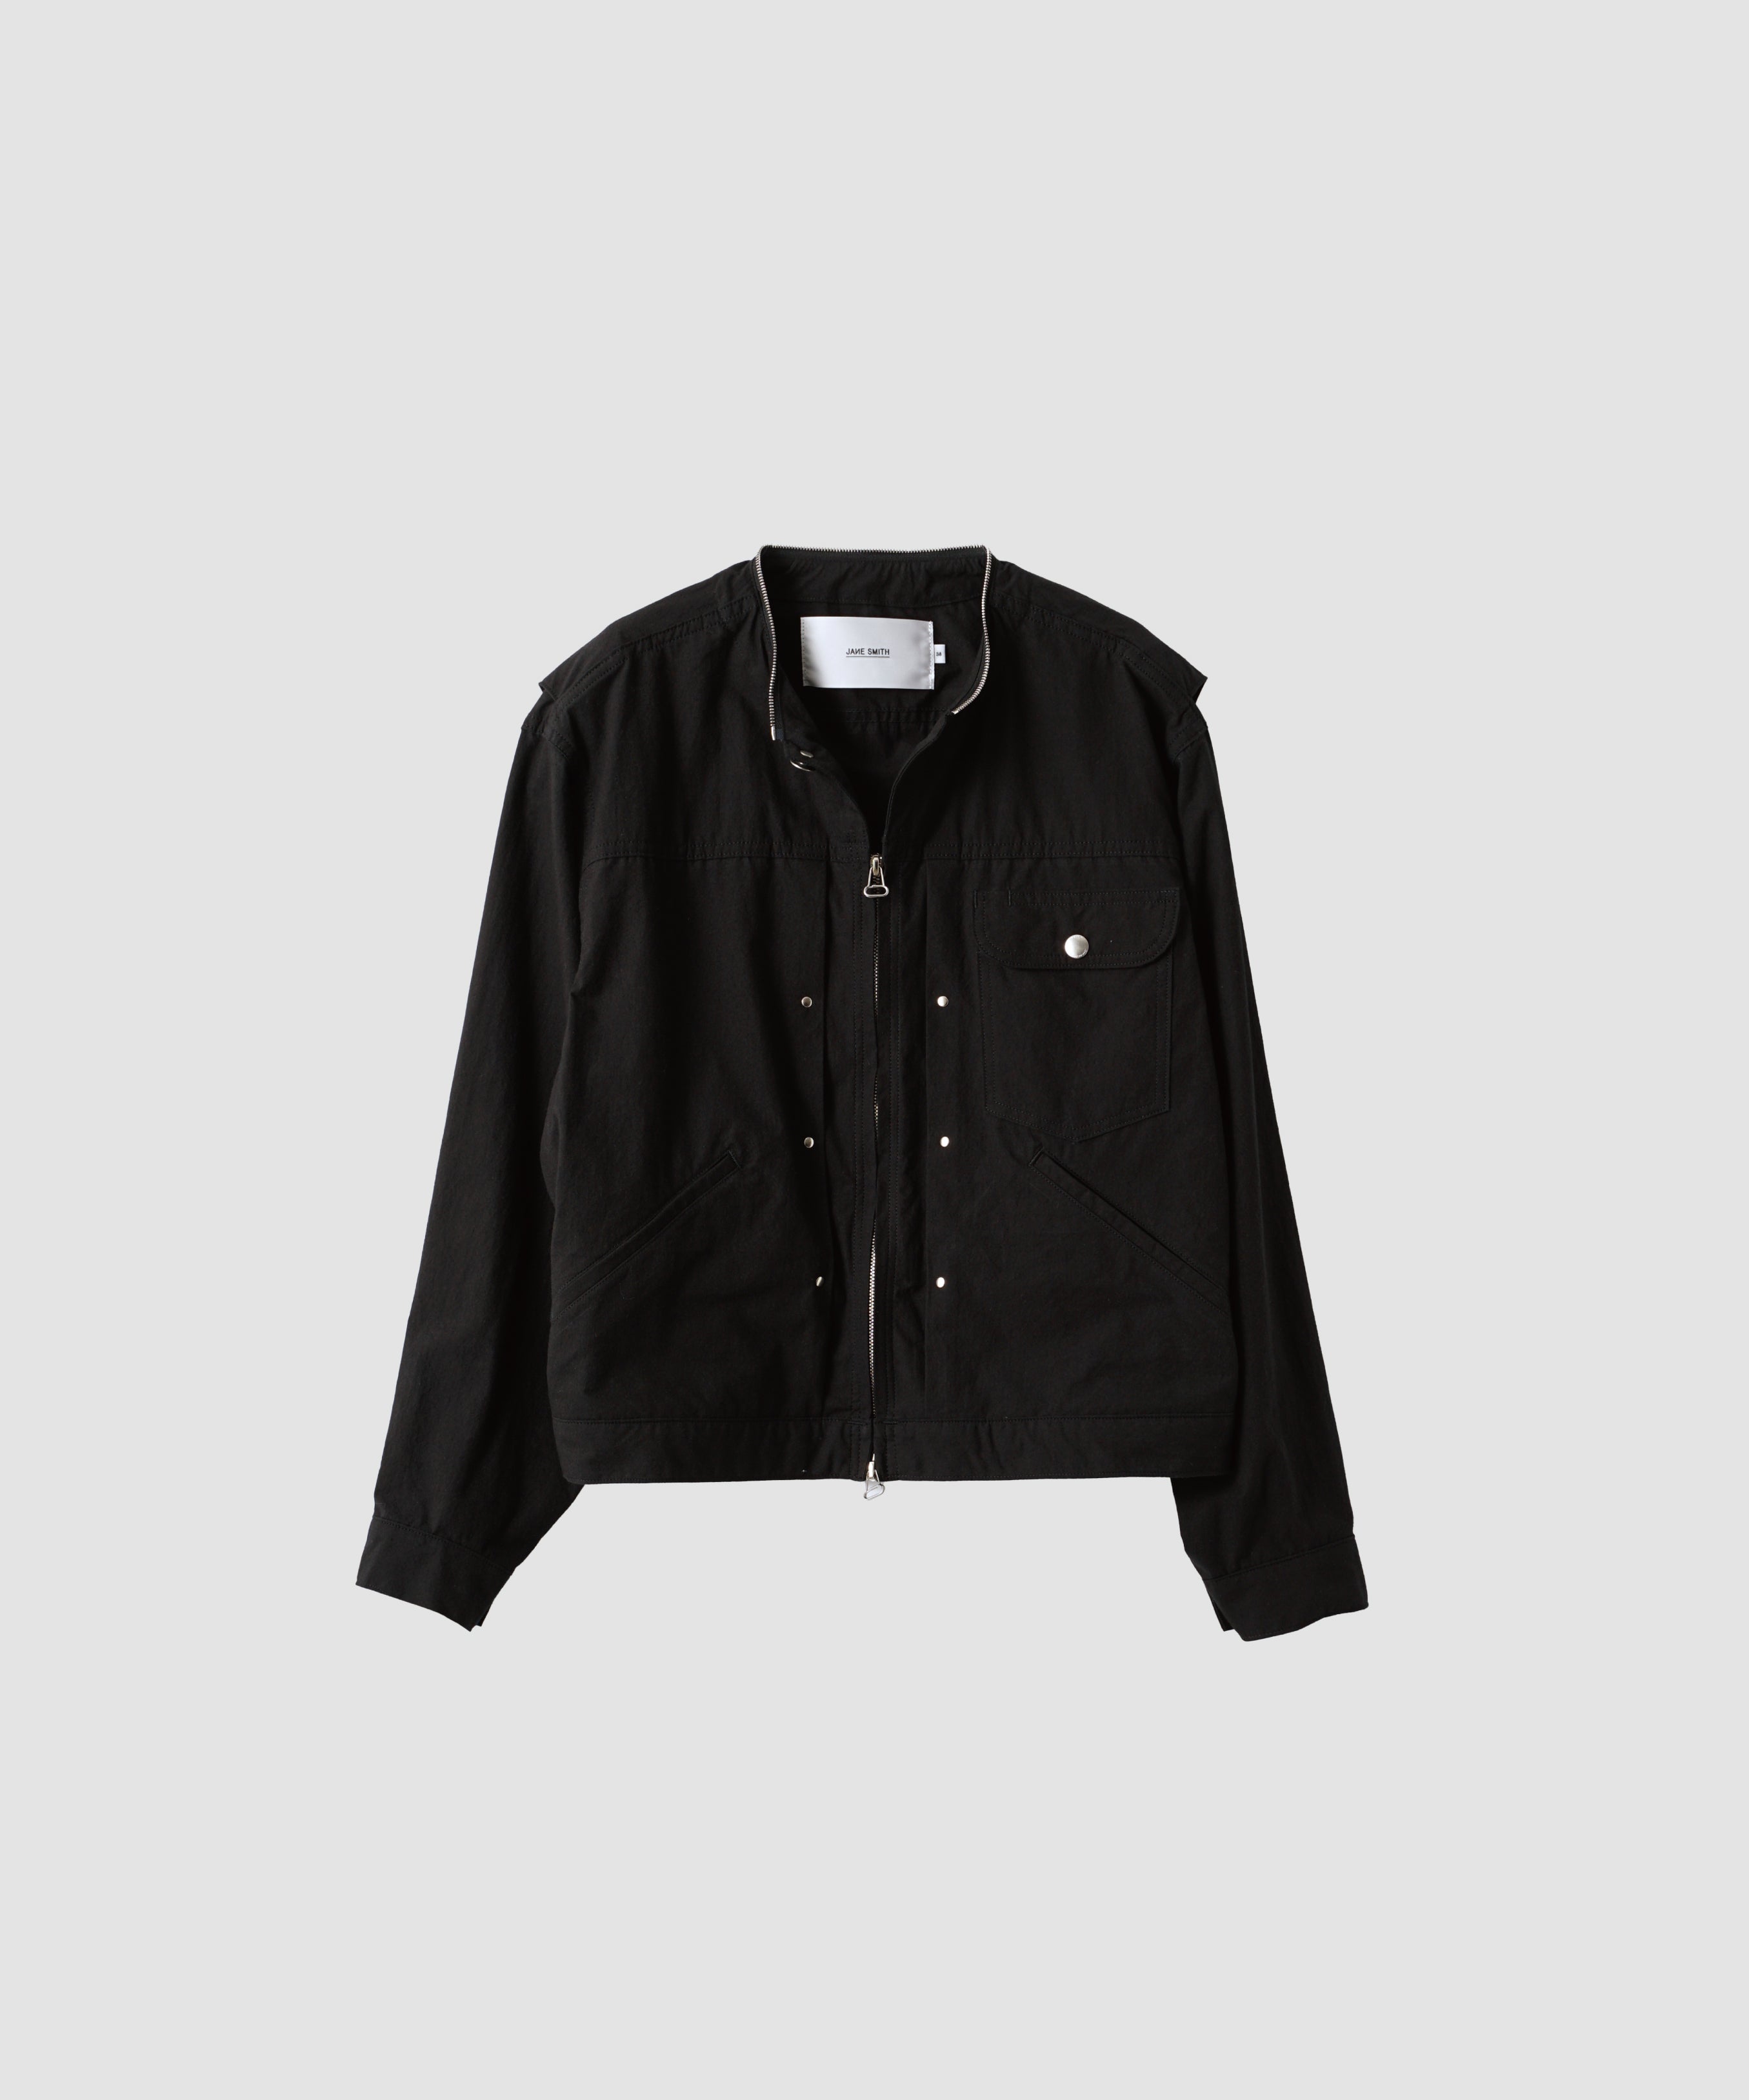 WASHED COTTON BROAD REMOVAL COLLAR TRUCKER JACKET